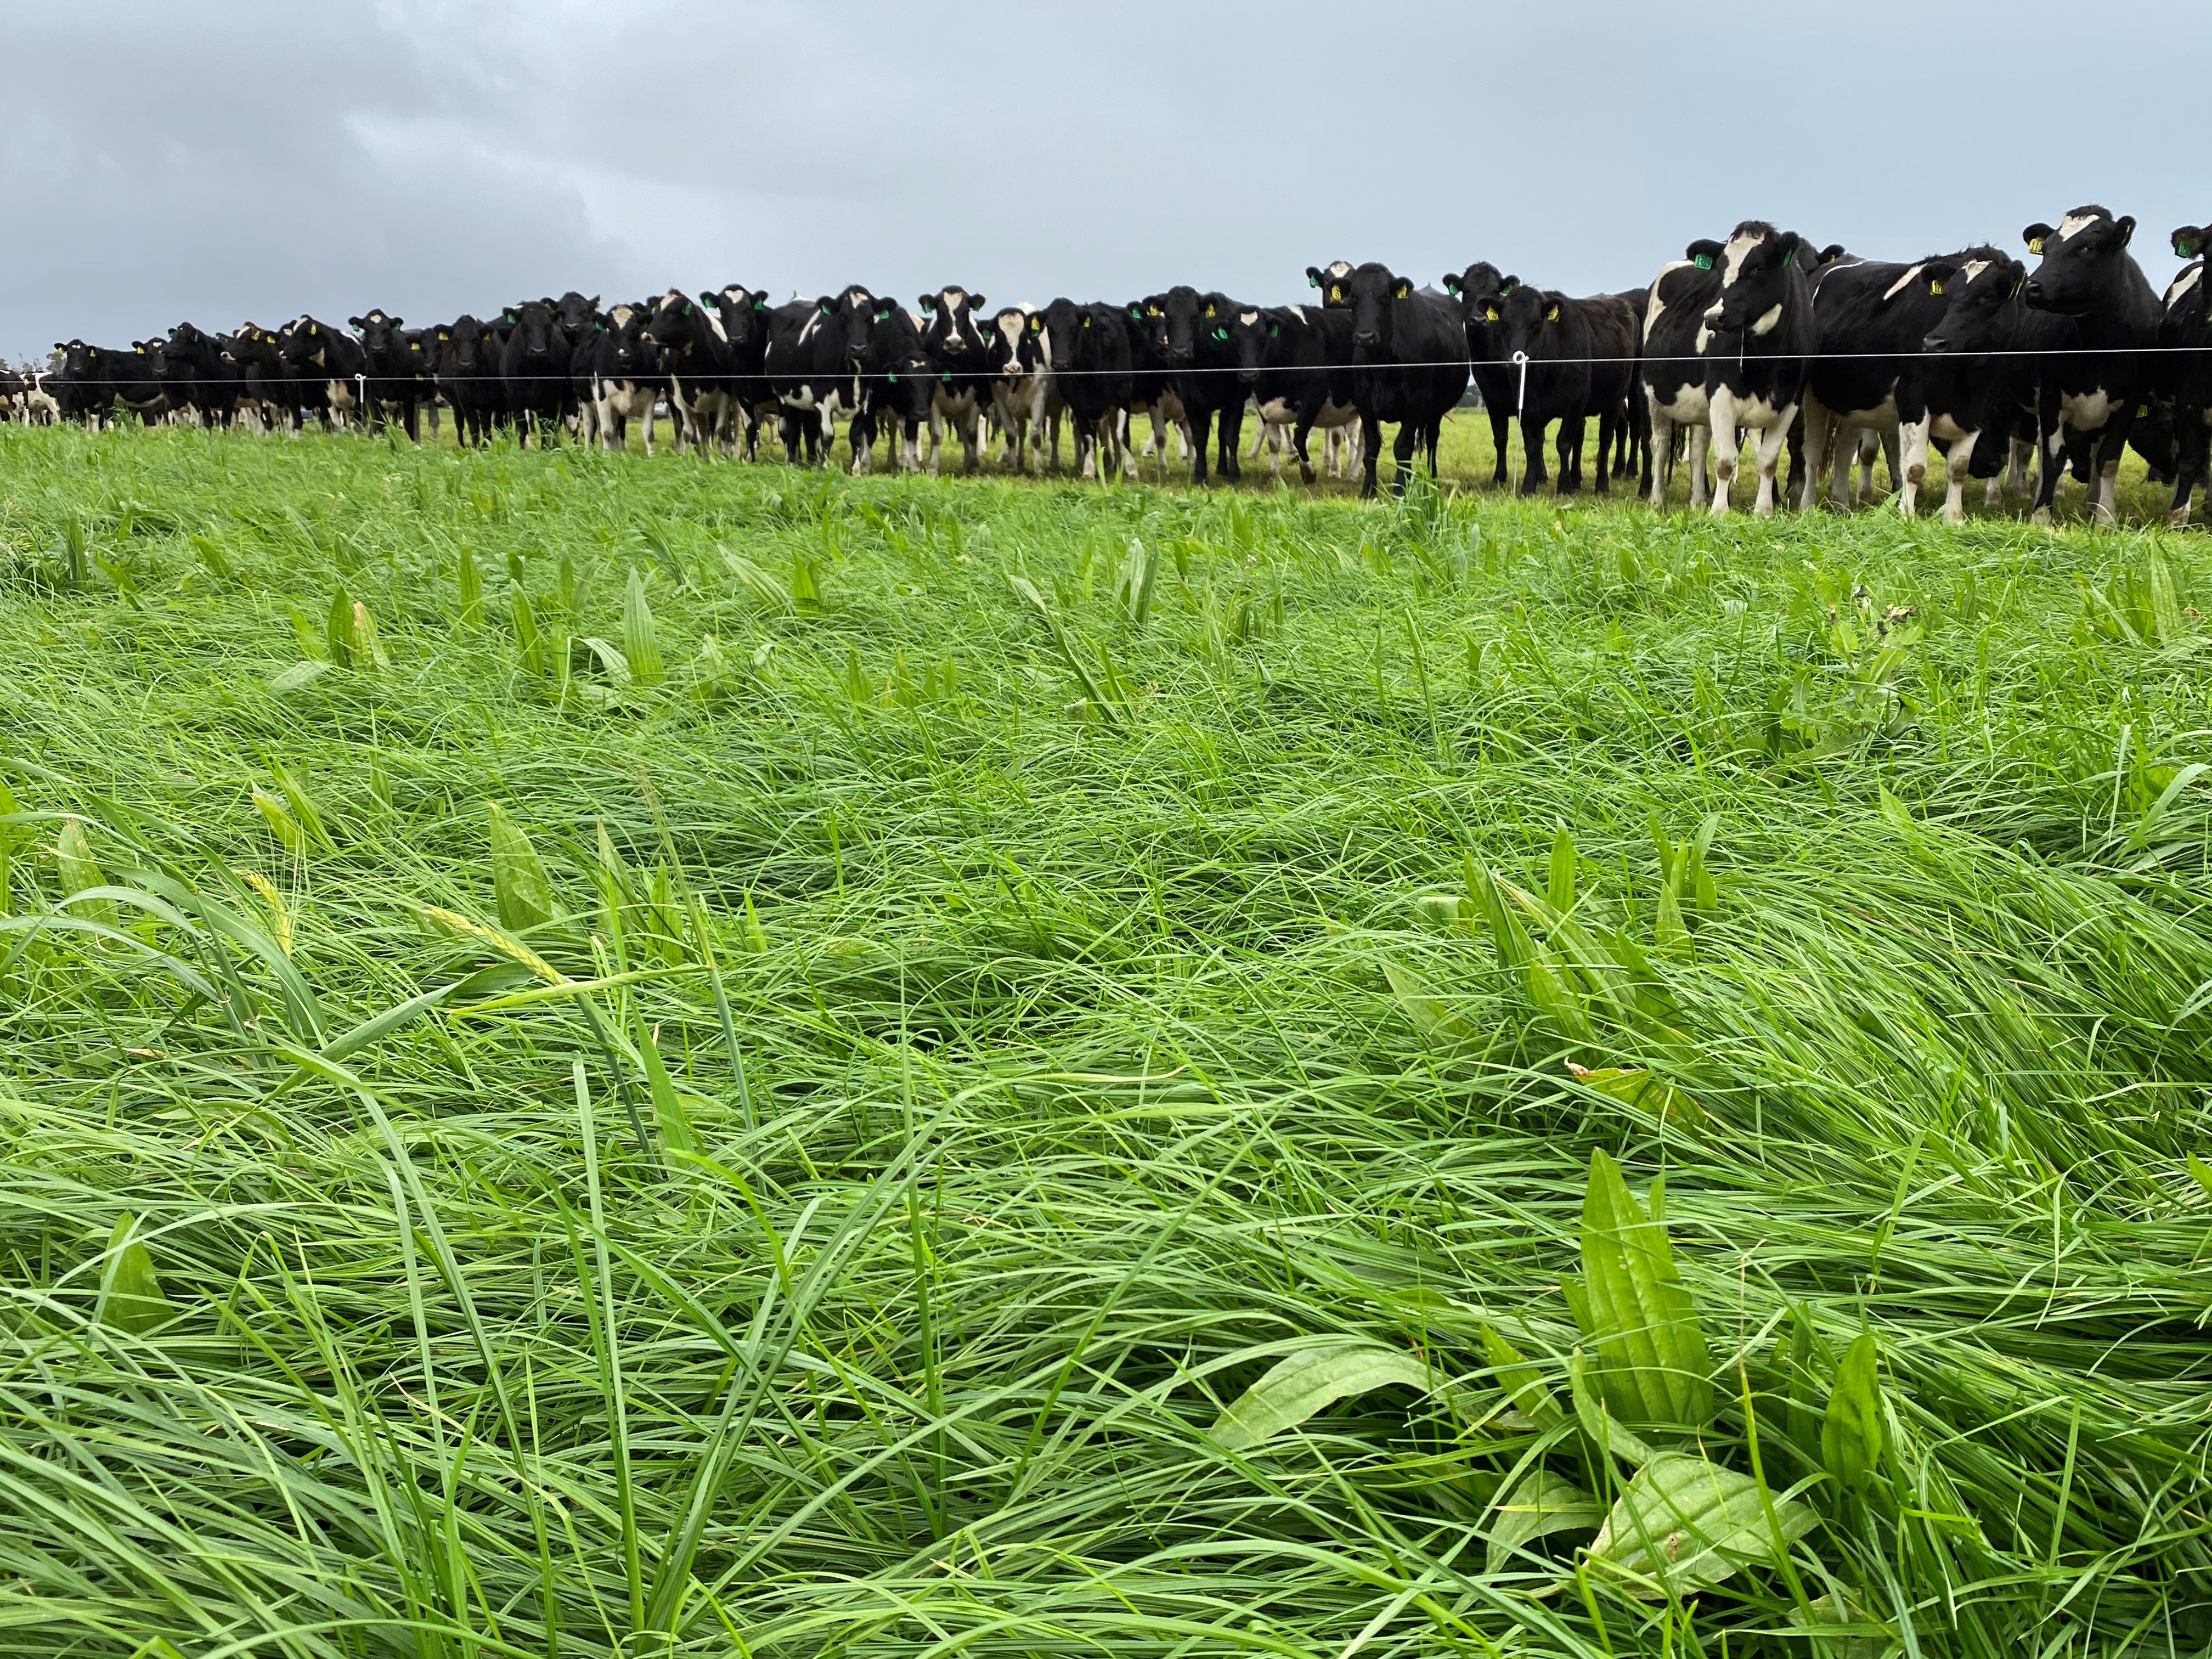 Cattle in a paddock of Ecotain and Ryegrass